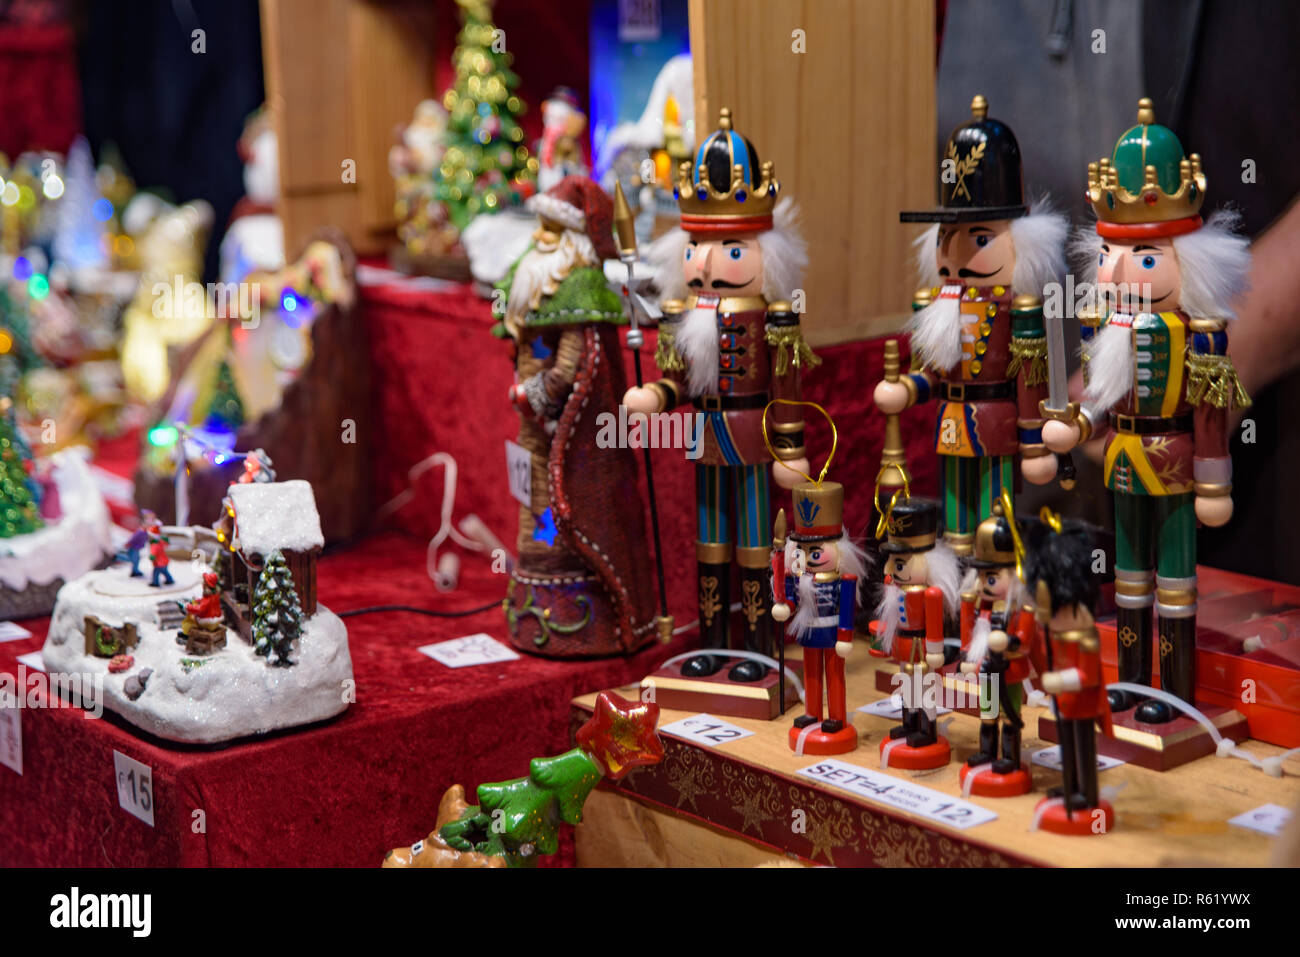 Art craft stall in 2018 Christmas market in Brussels, Belgium Stock Photo